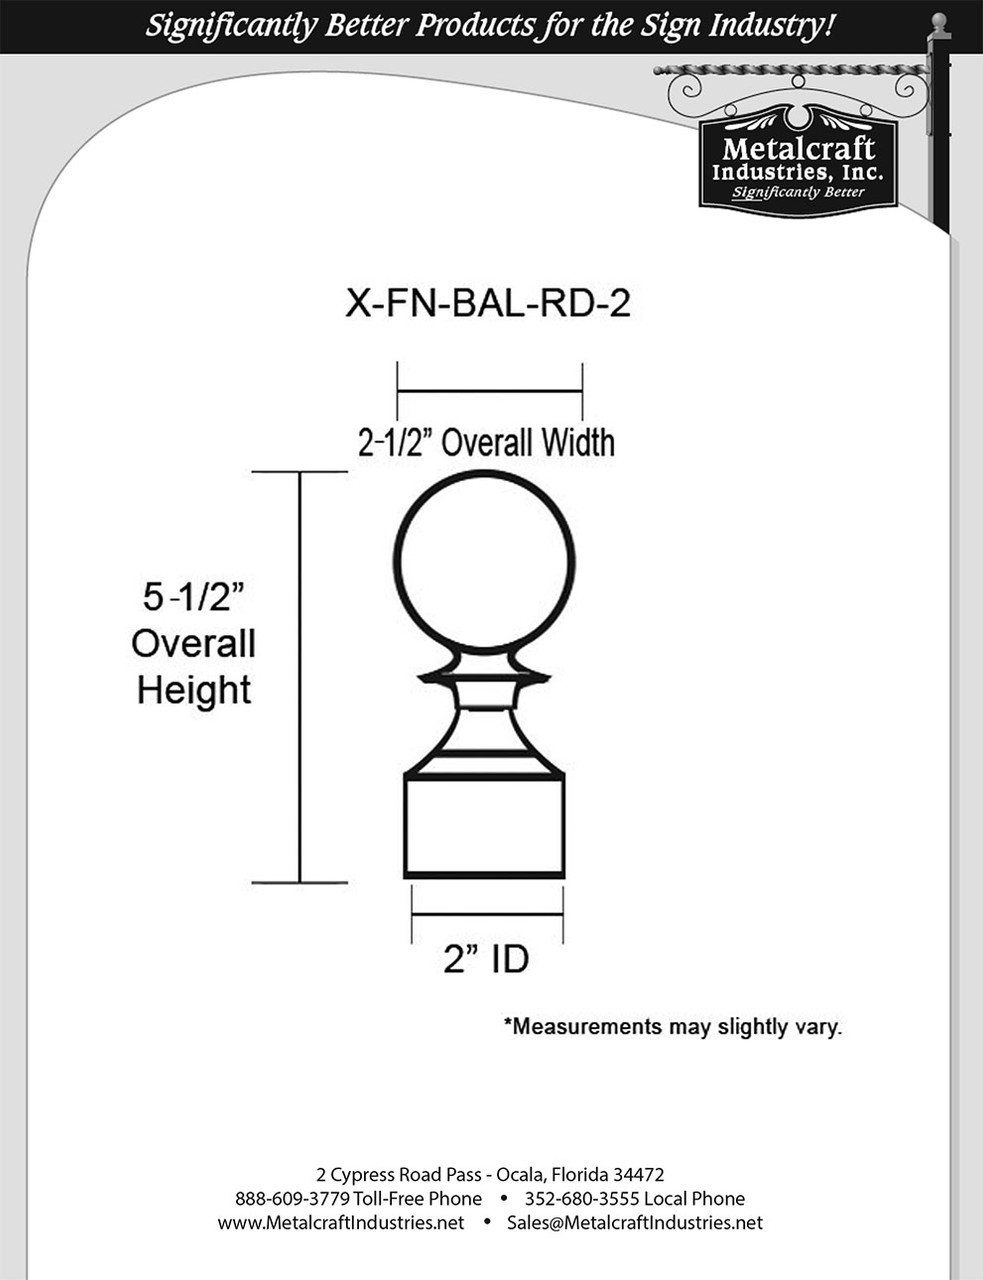 X-FN-BAL-RD-2
SPECIFICATION DRAWING